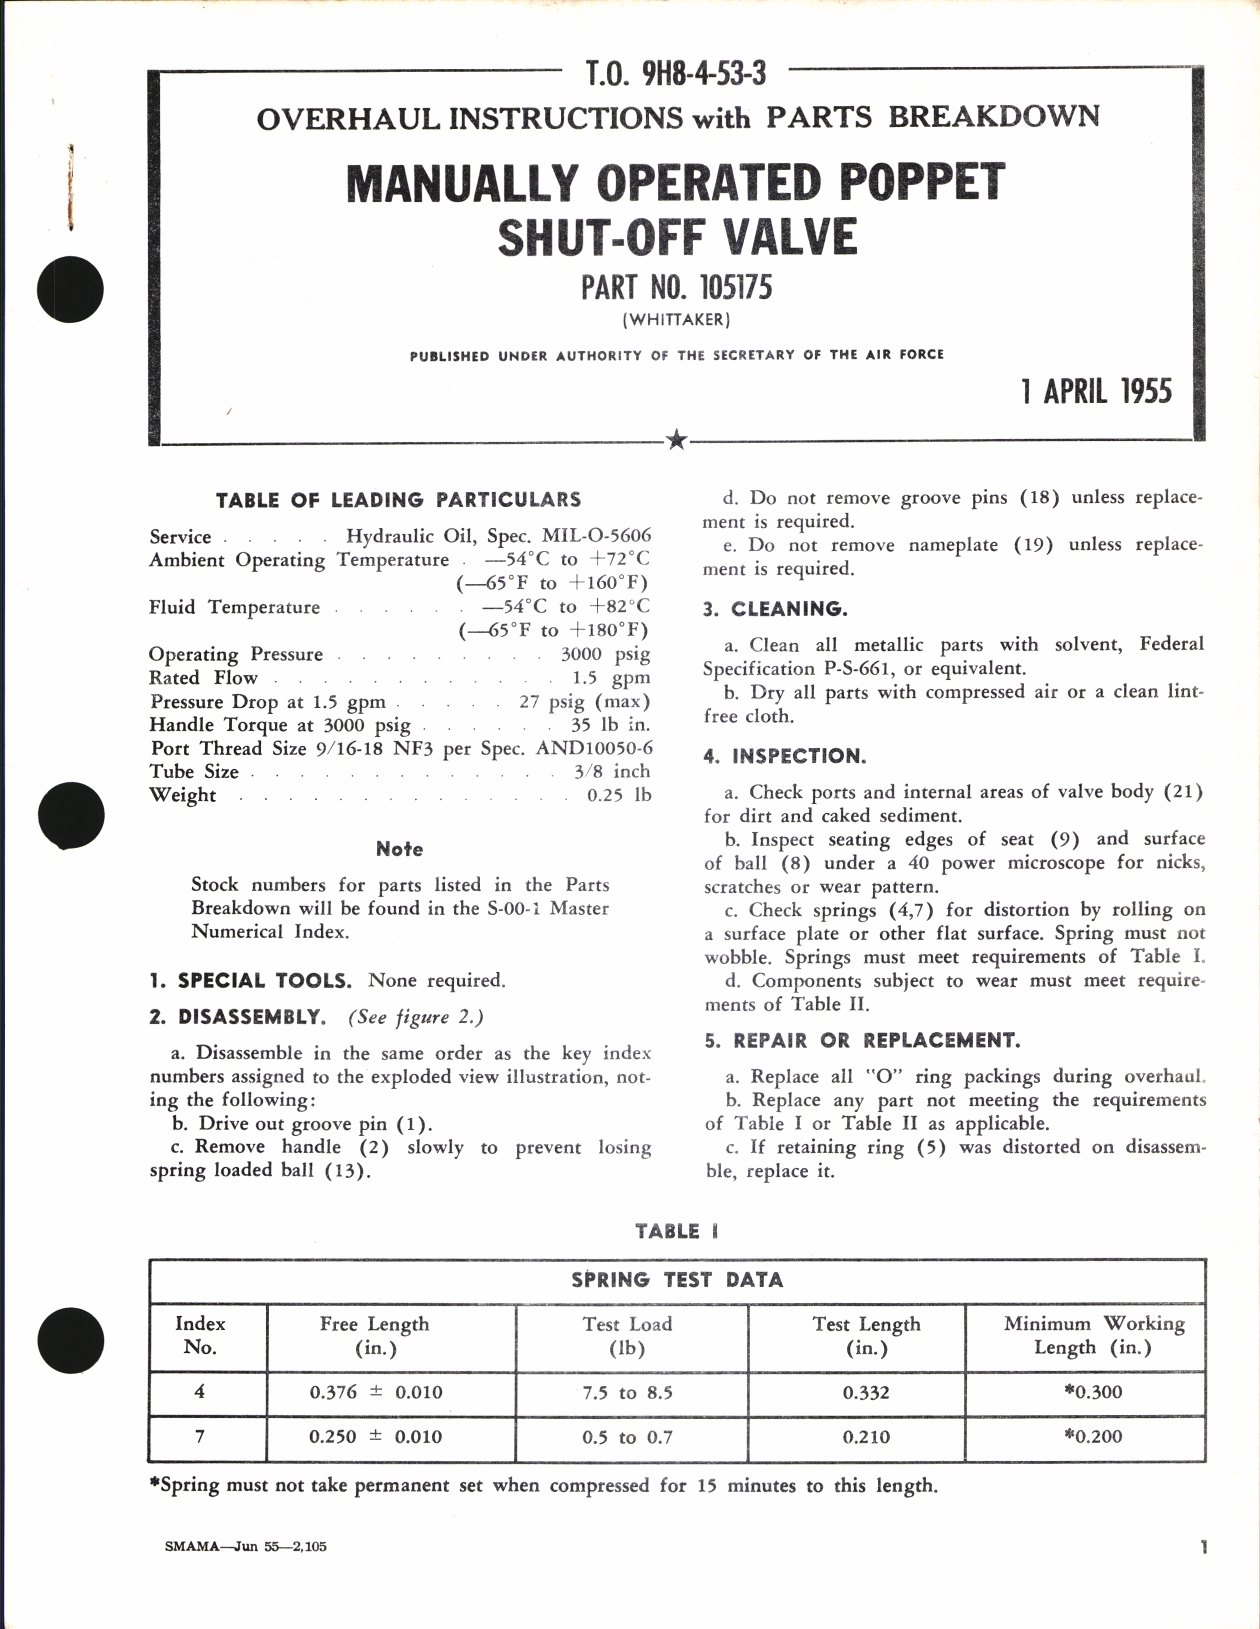 Sample page 1 from AirCorps Library document: Overhaul Instructions with Parts Breakdown for Manually Operated Poppet Shut-Off Valve Part no. 105175